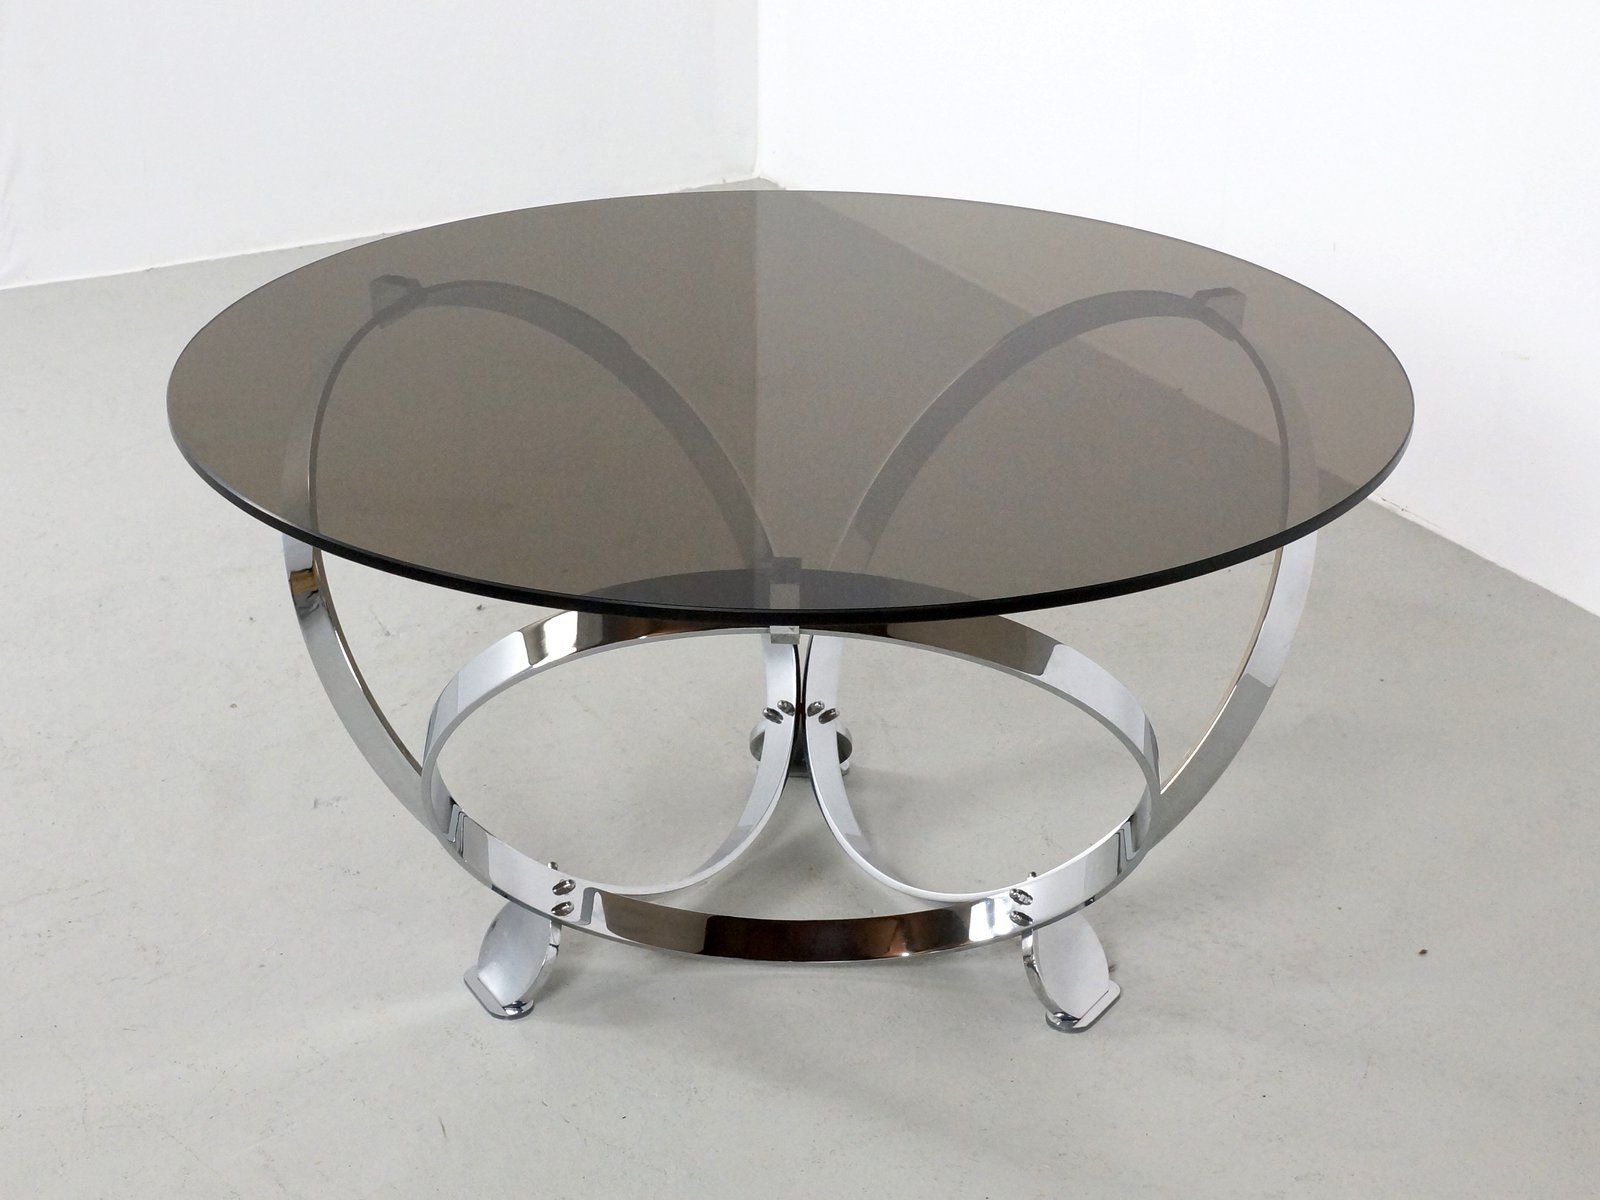 Chrome Coffee Tables Within Famous Chrome And Glass Round Coffee Tableknut Hesterberg (View 7 of 20)